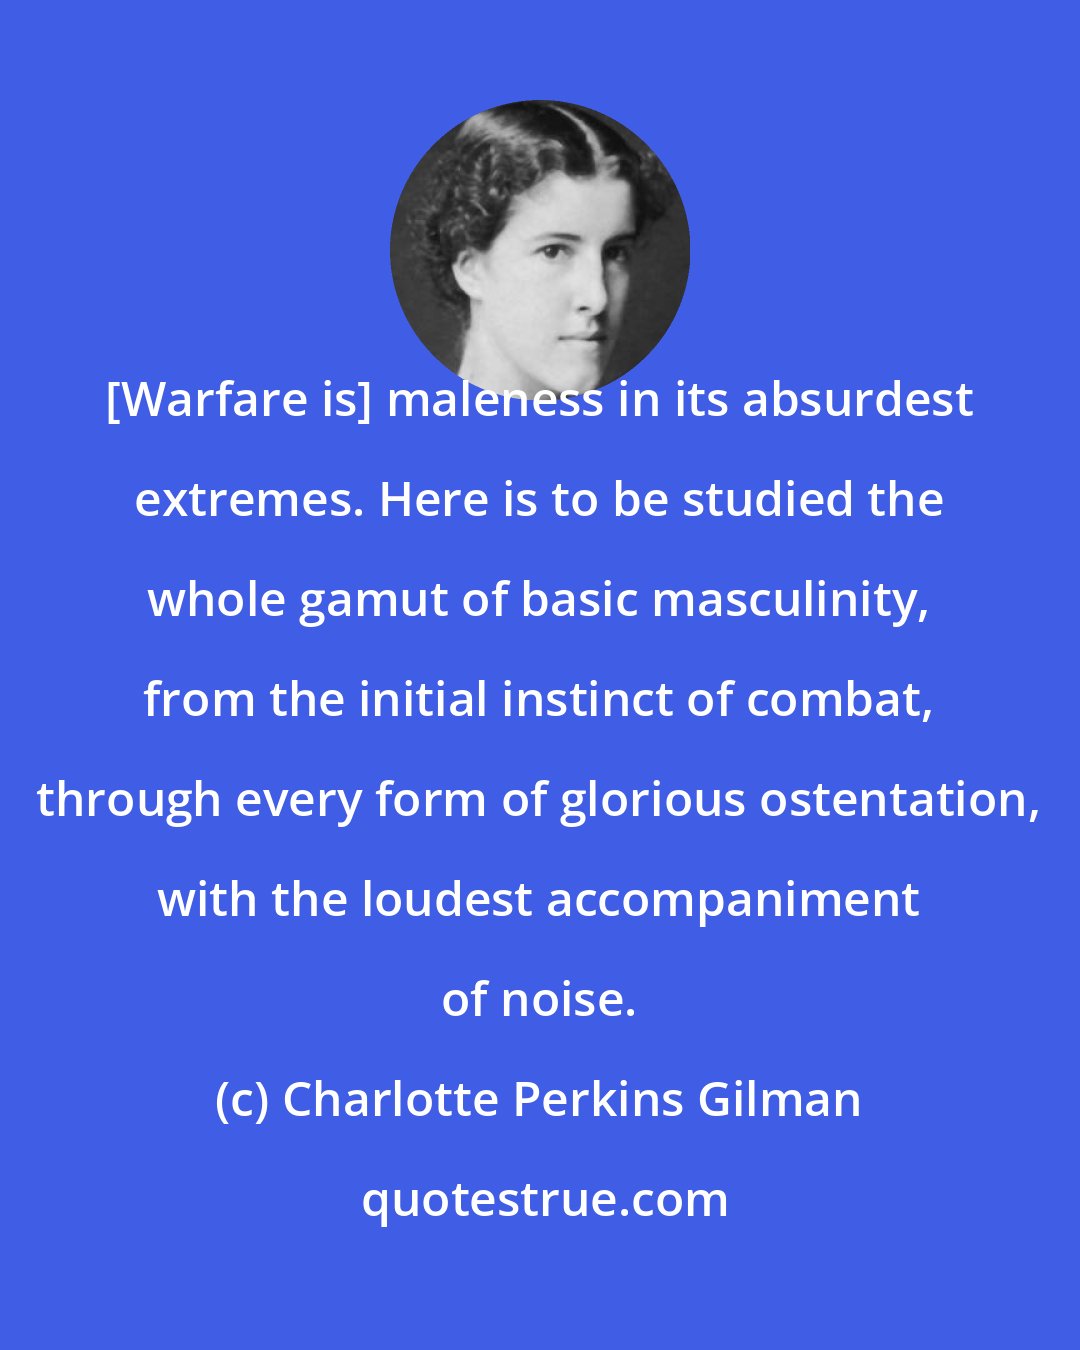 Charlotte Perkins Gilman: [Warfare is] maleness in its absurdest extremes. Here is to be studied the whole gamut of basic masculinity, from the initial instinct of combat, through every form of glorious ostentation, with the loudest accompaniment of noise.